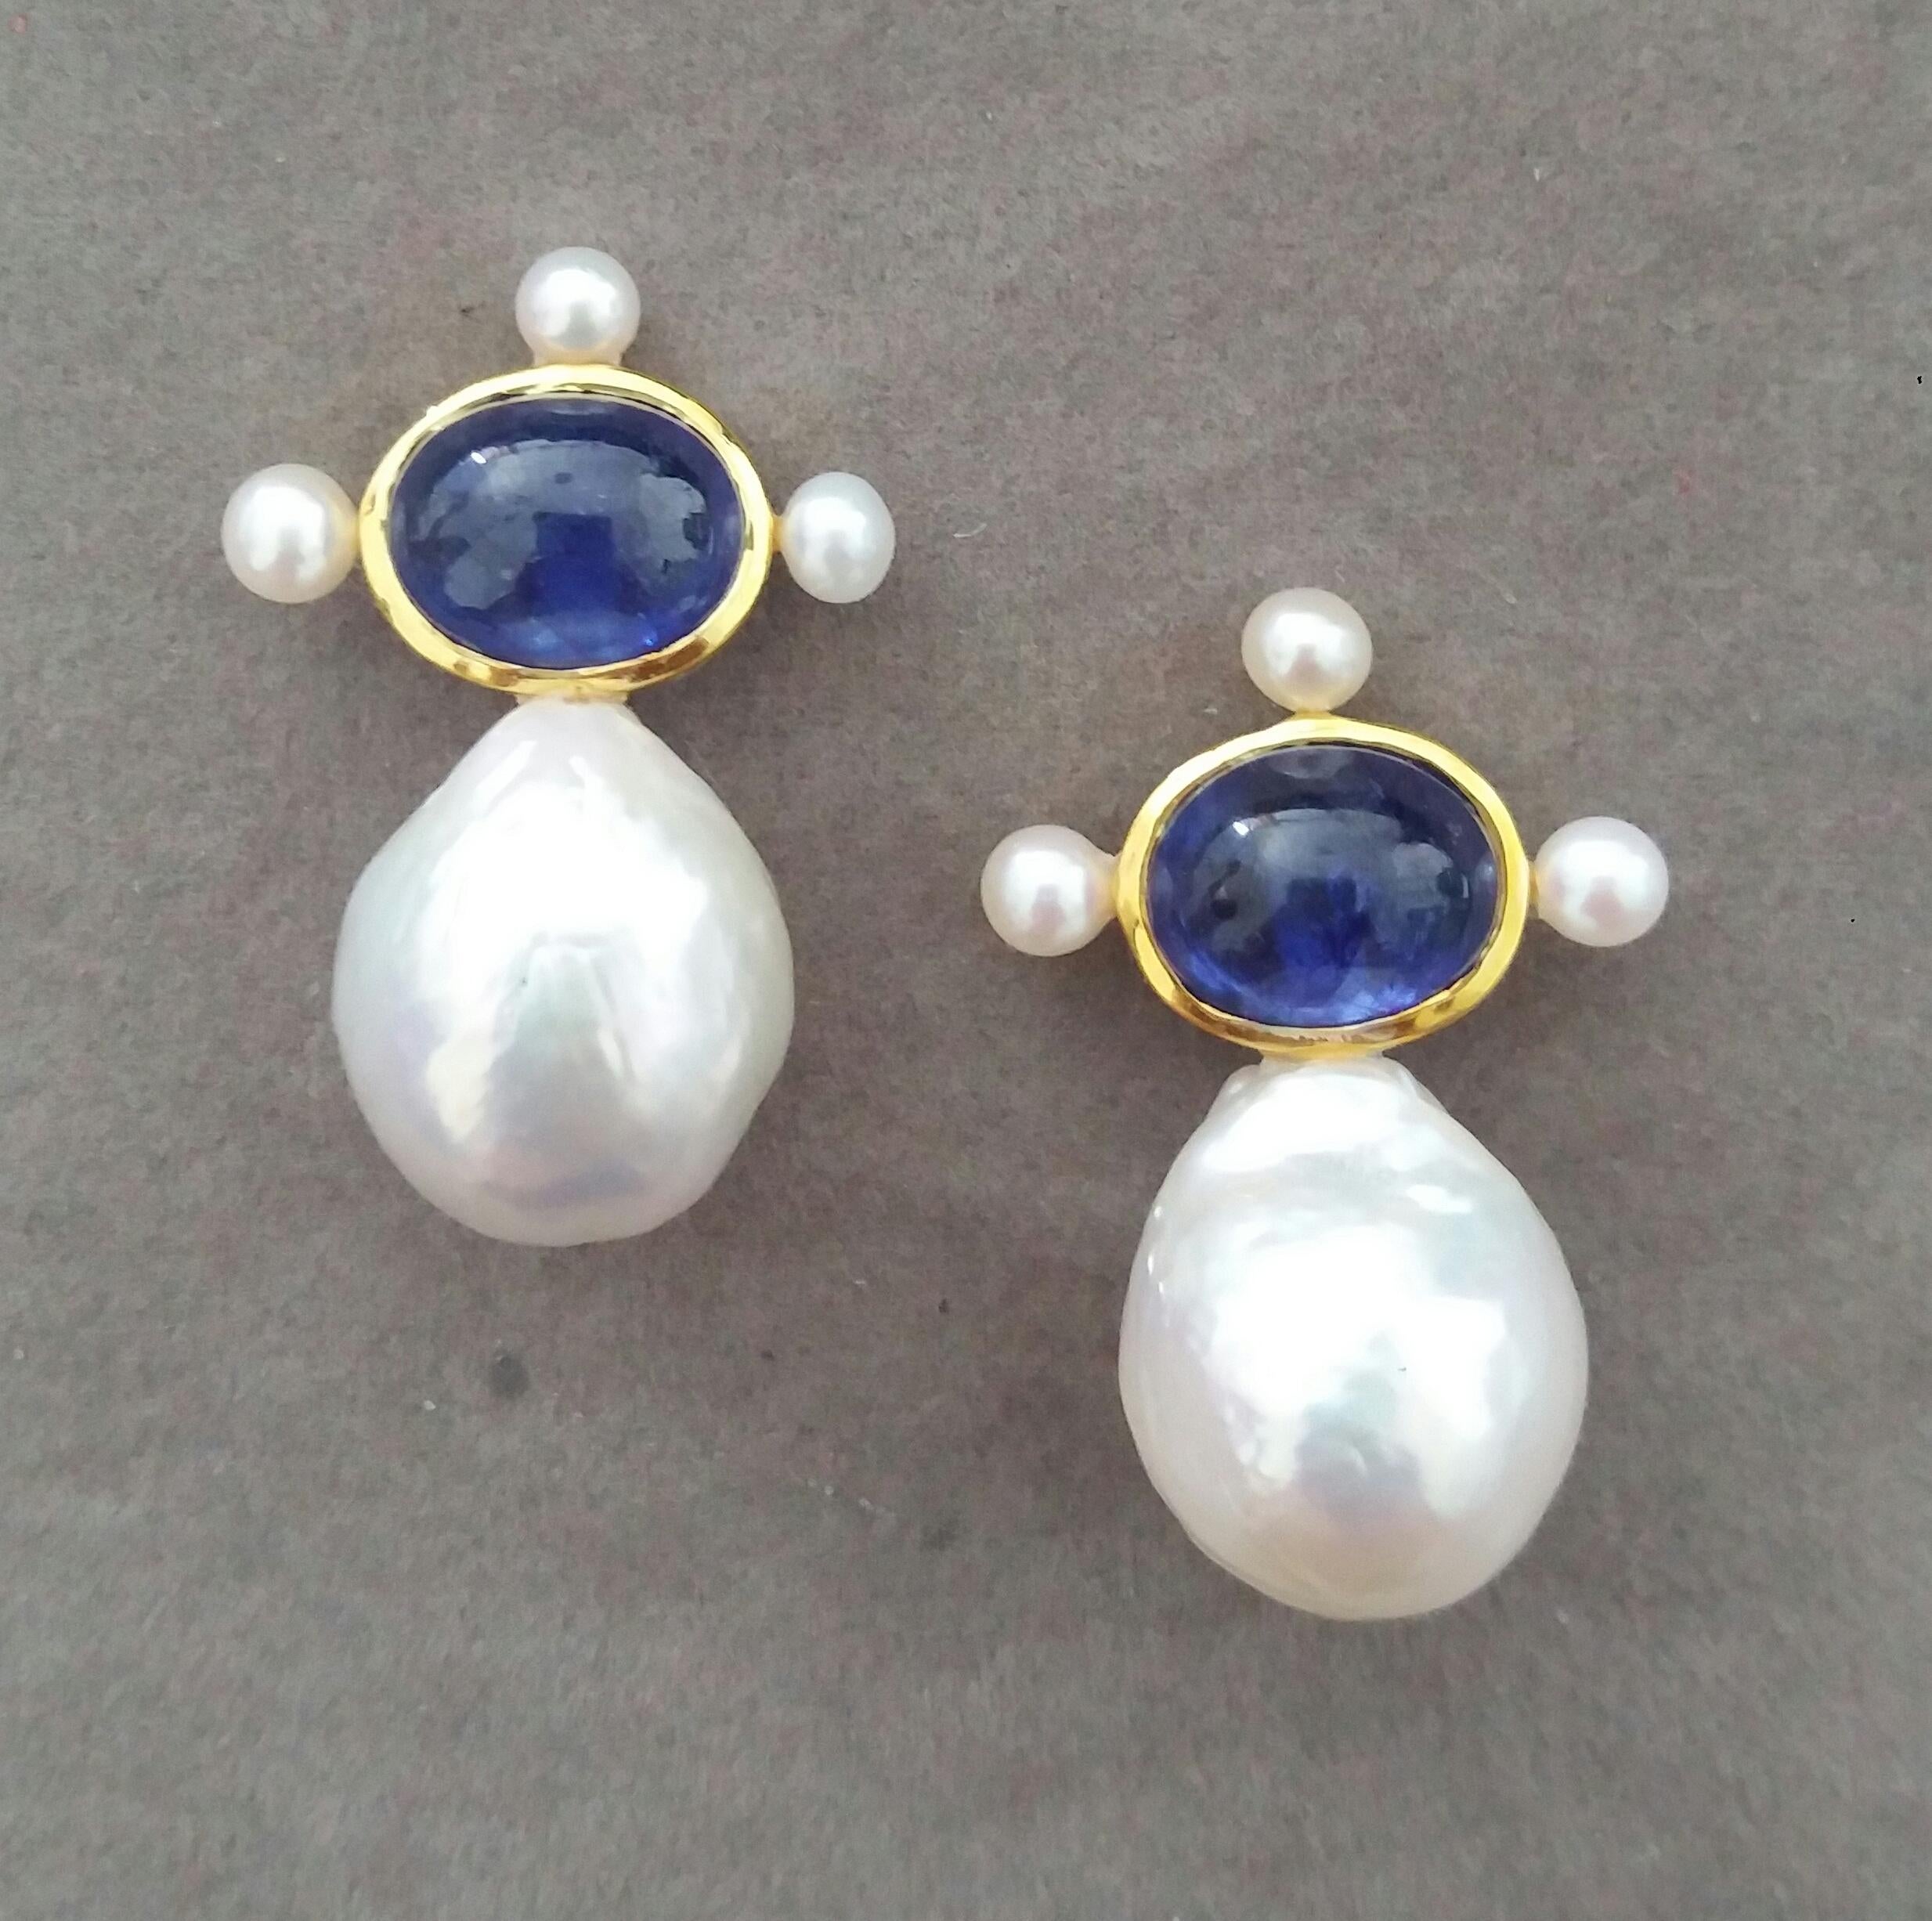 These elegant and handmade earrings have 2 Oval  Blue Sapphire cabs measuring 8 x 10 mm set in a 14 Kt yellow gold bezel with 3 small round pearls of 4mm on 3 sides at the top to which are suspended 2 very good luster White Pear Shape Baroque Pearls